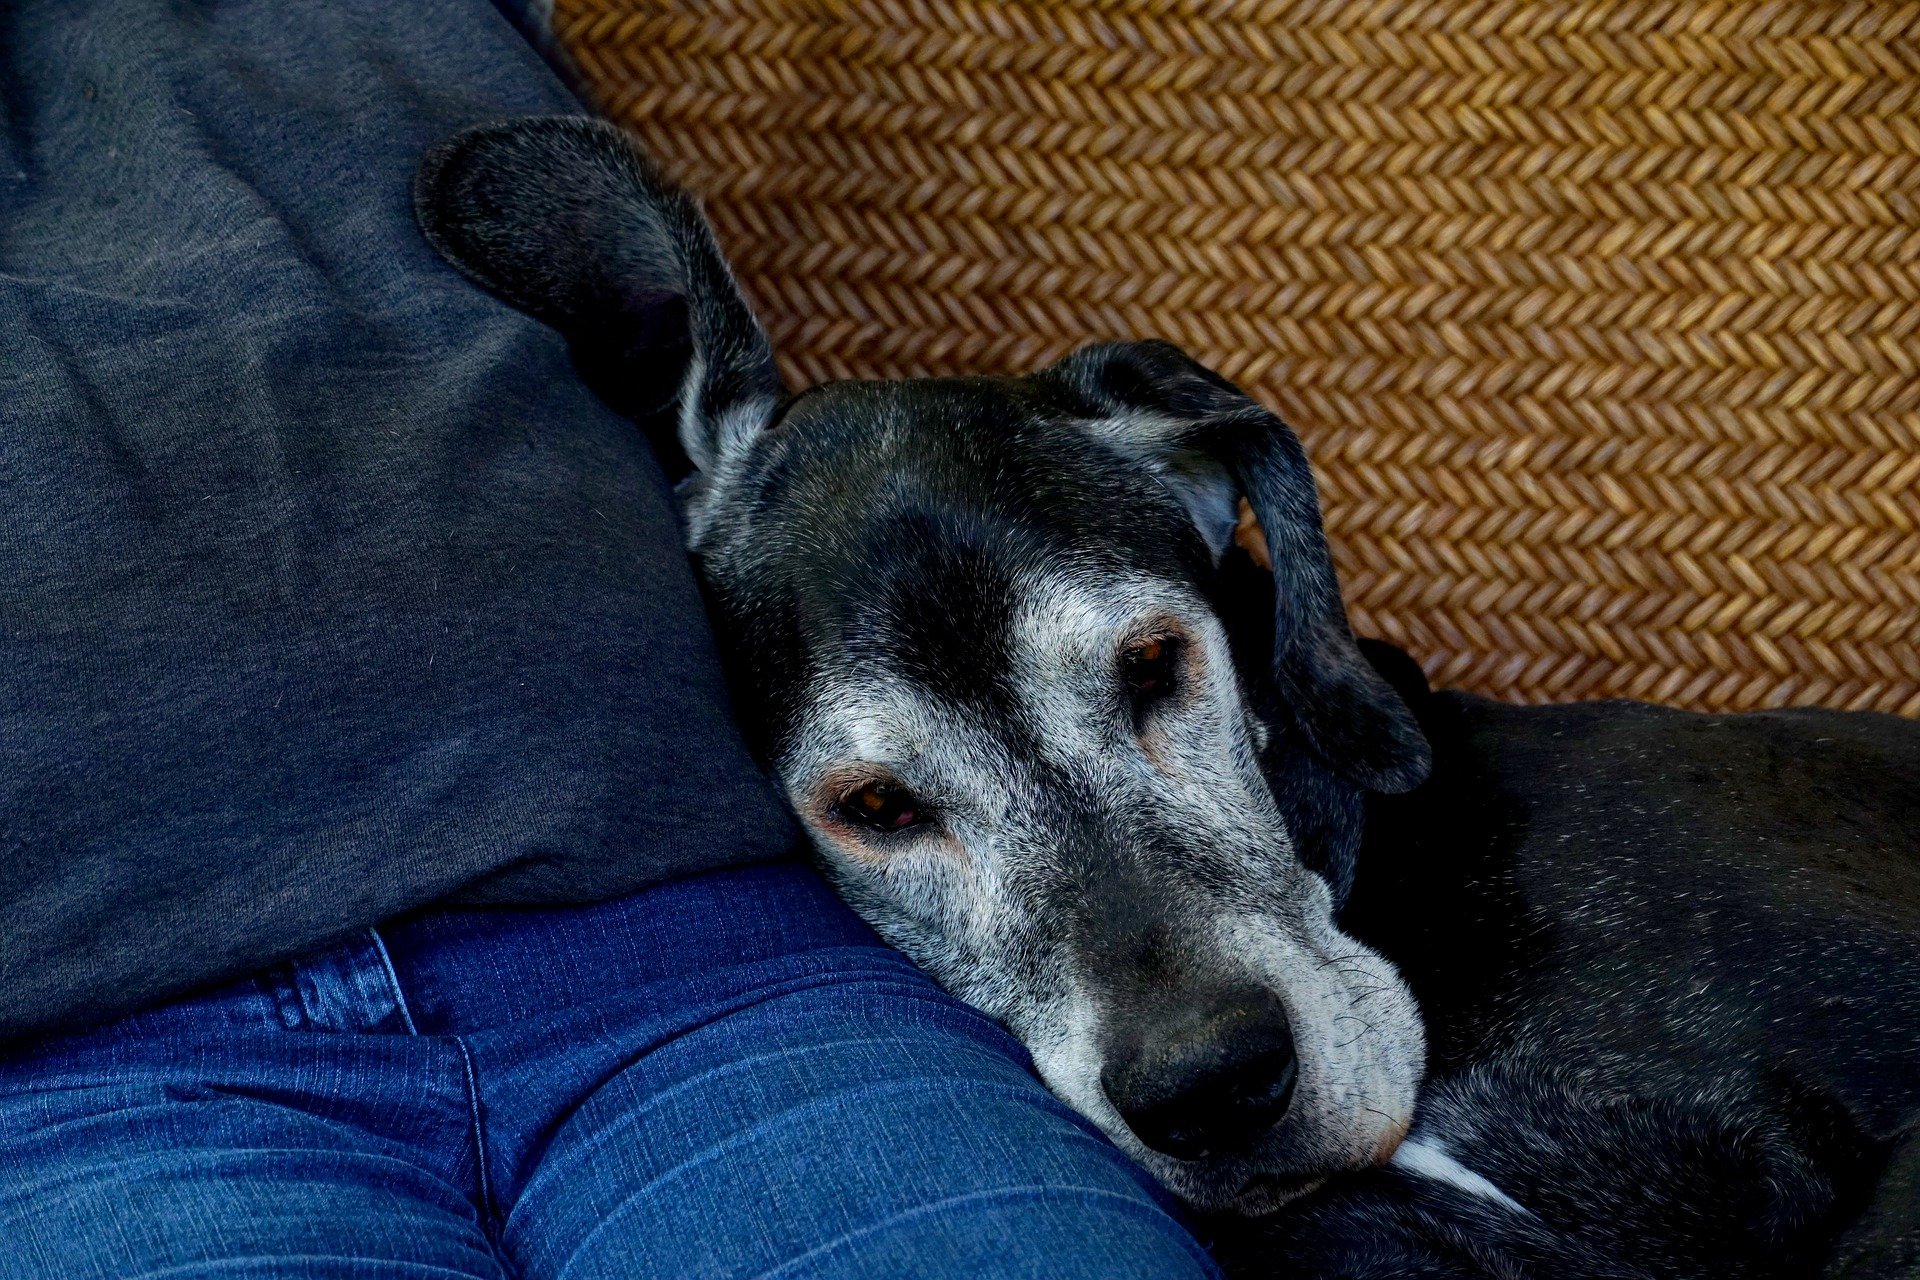 An old dog lays next to his owner on the couch